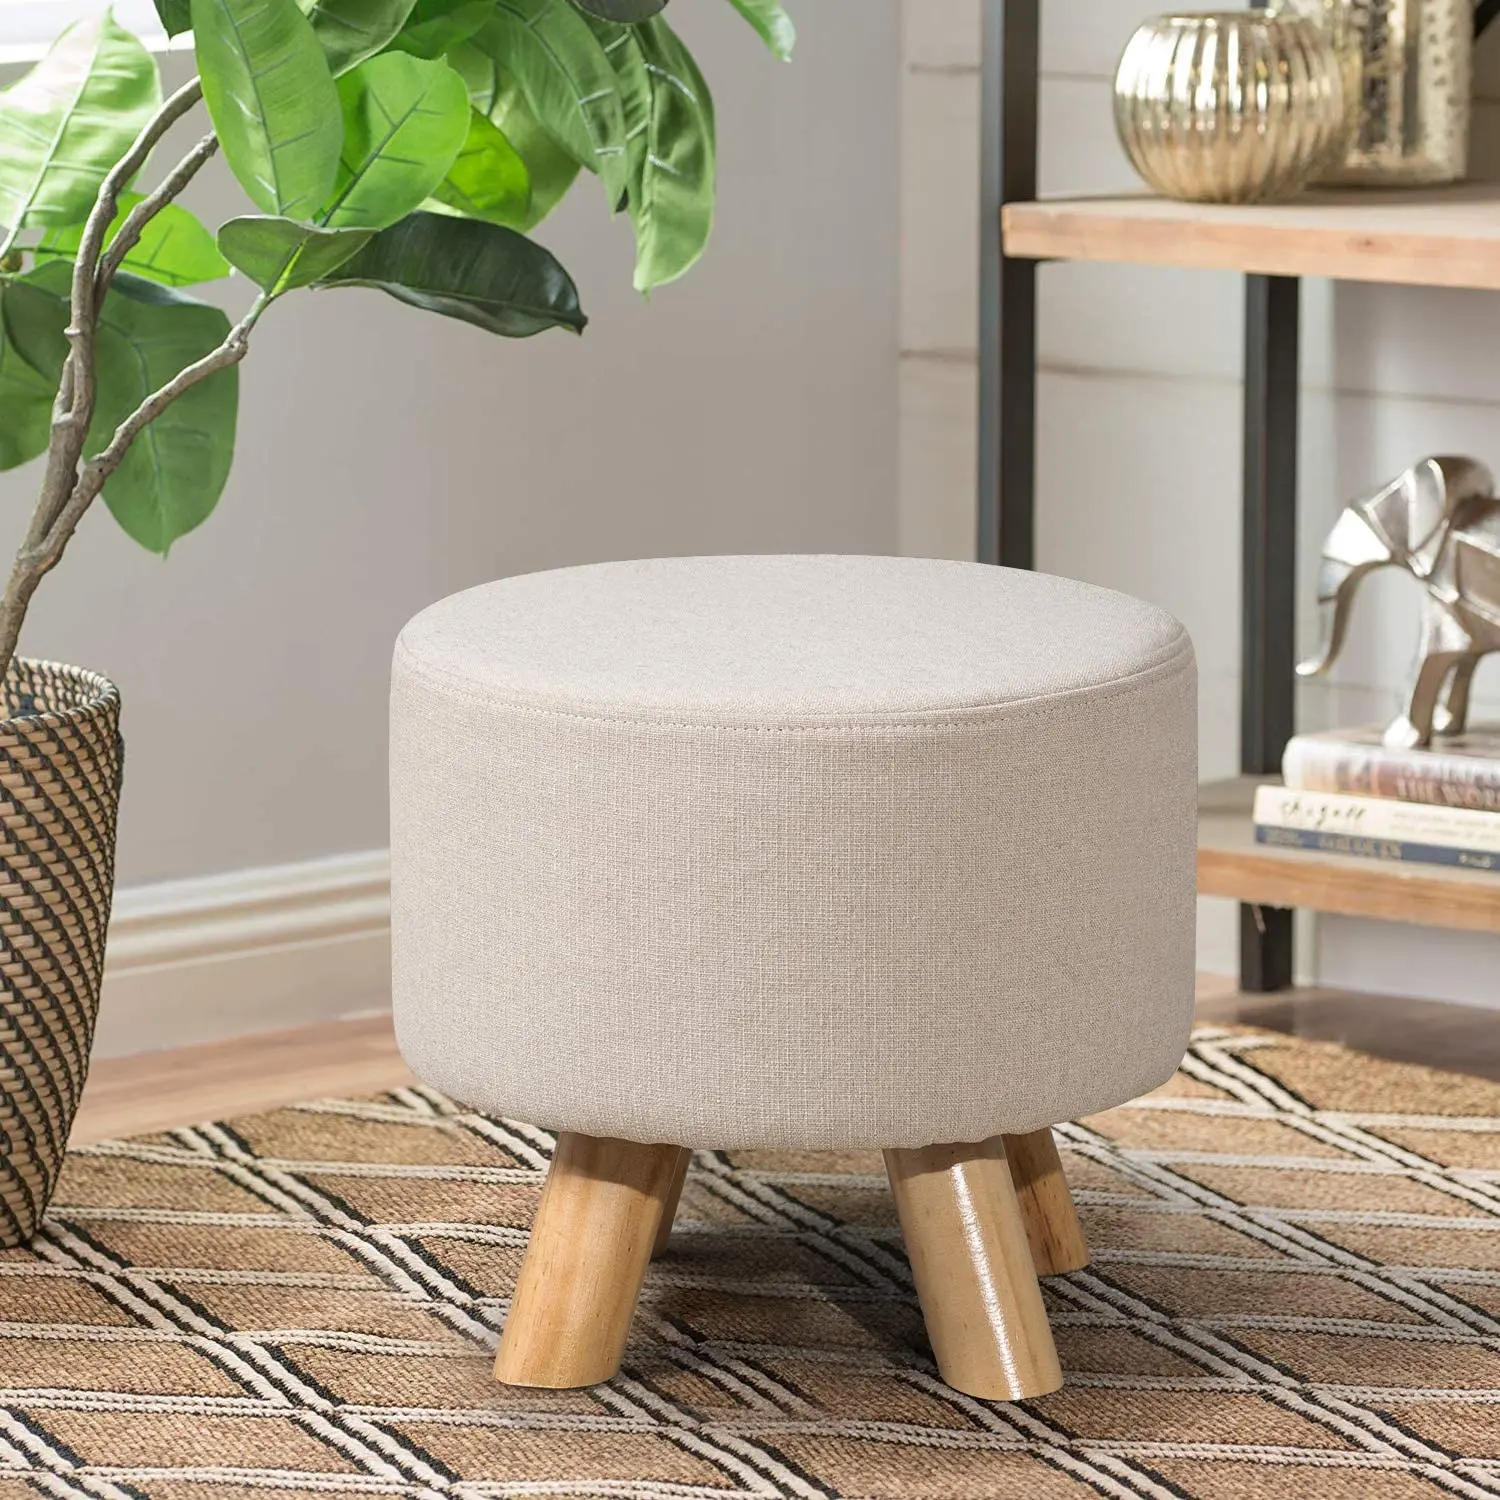 Removable Cover Round Ottoman Foot Rest Stool Linen Fabric Padded 